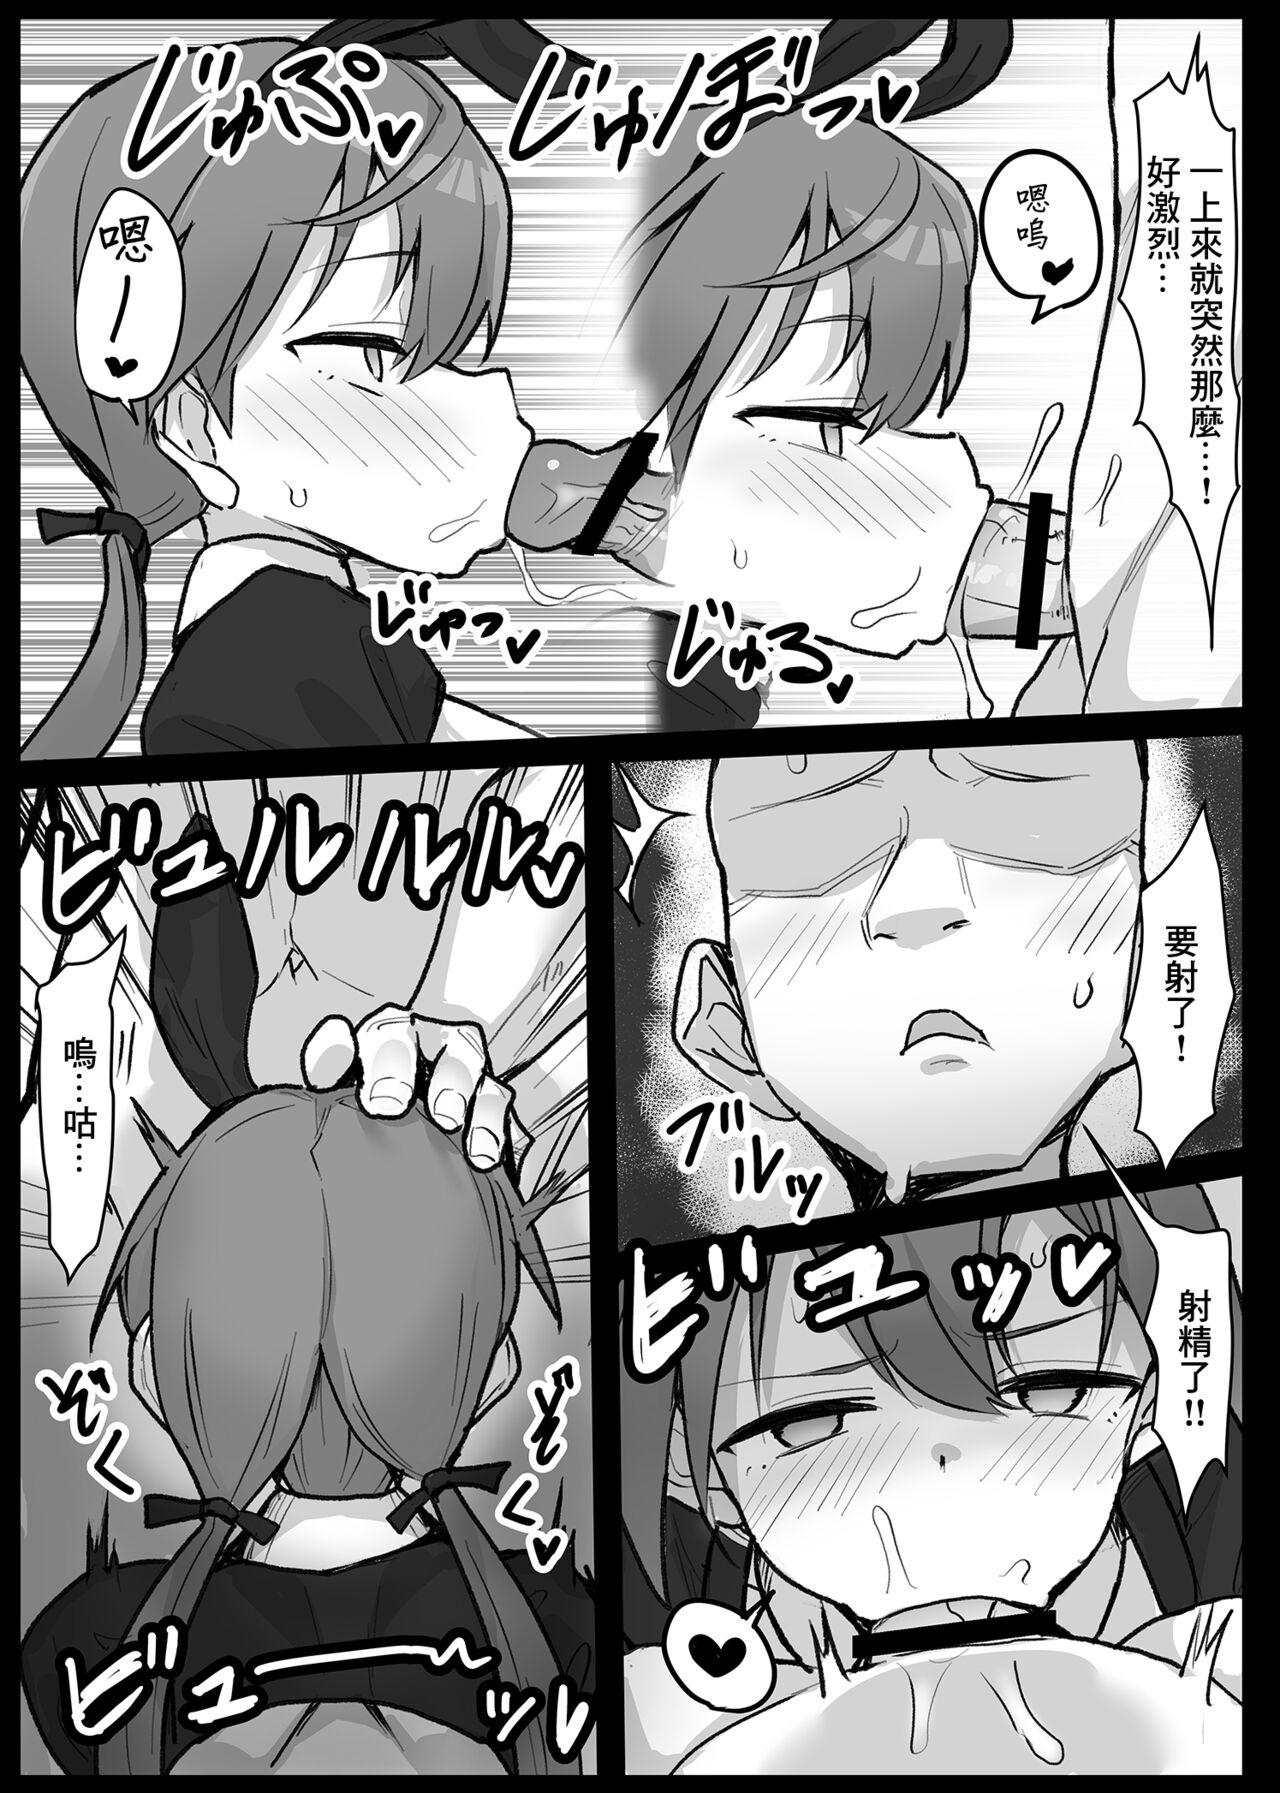 Cosplay Soapland 501 e Youkoso! - Strike witches Bottom - Page 4